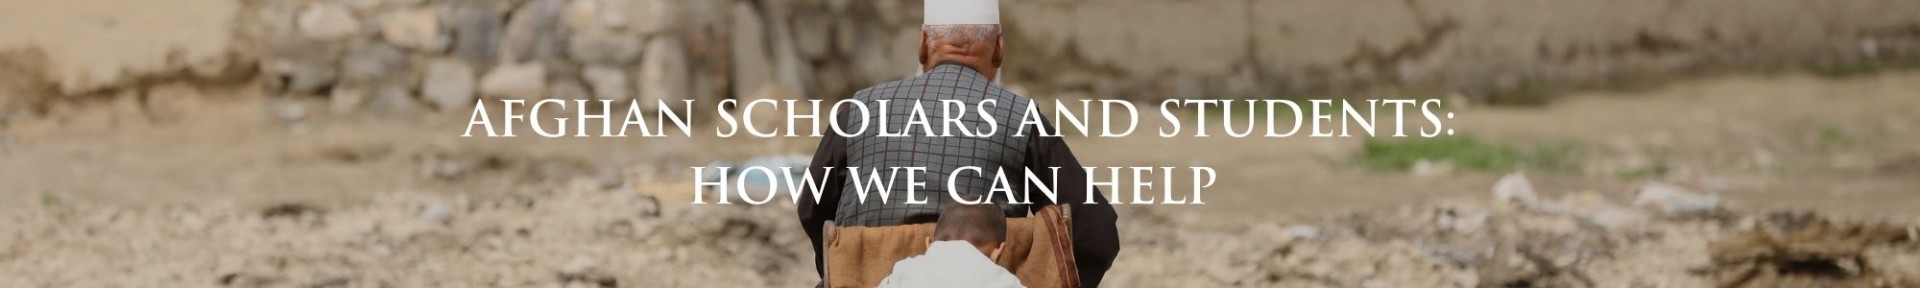 Afghanistan Scholars and Students: How We Can Help